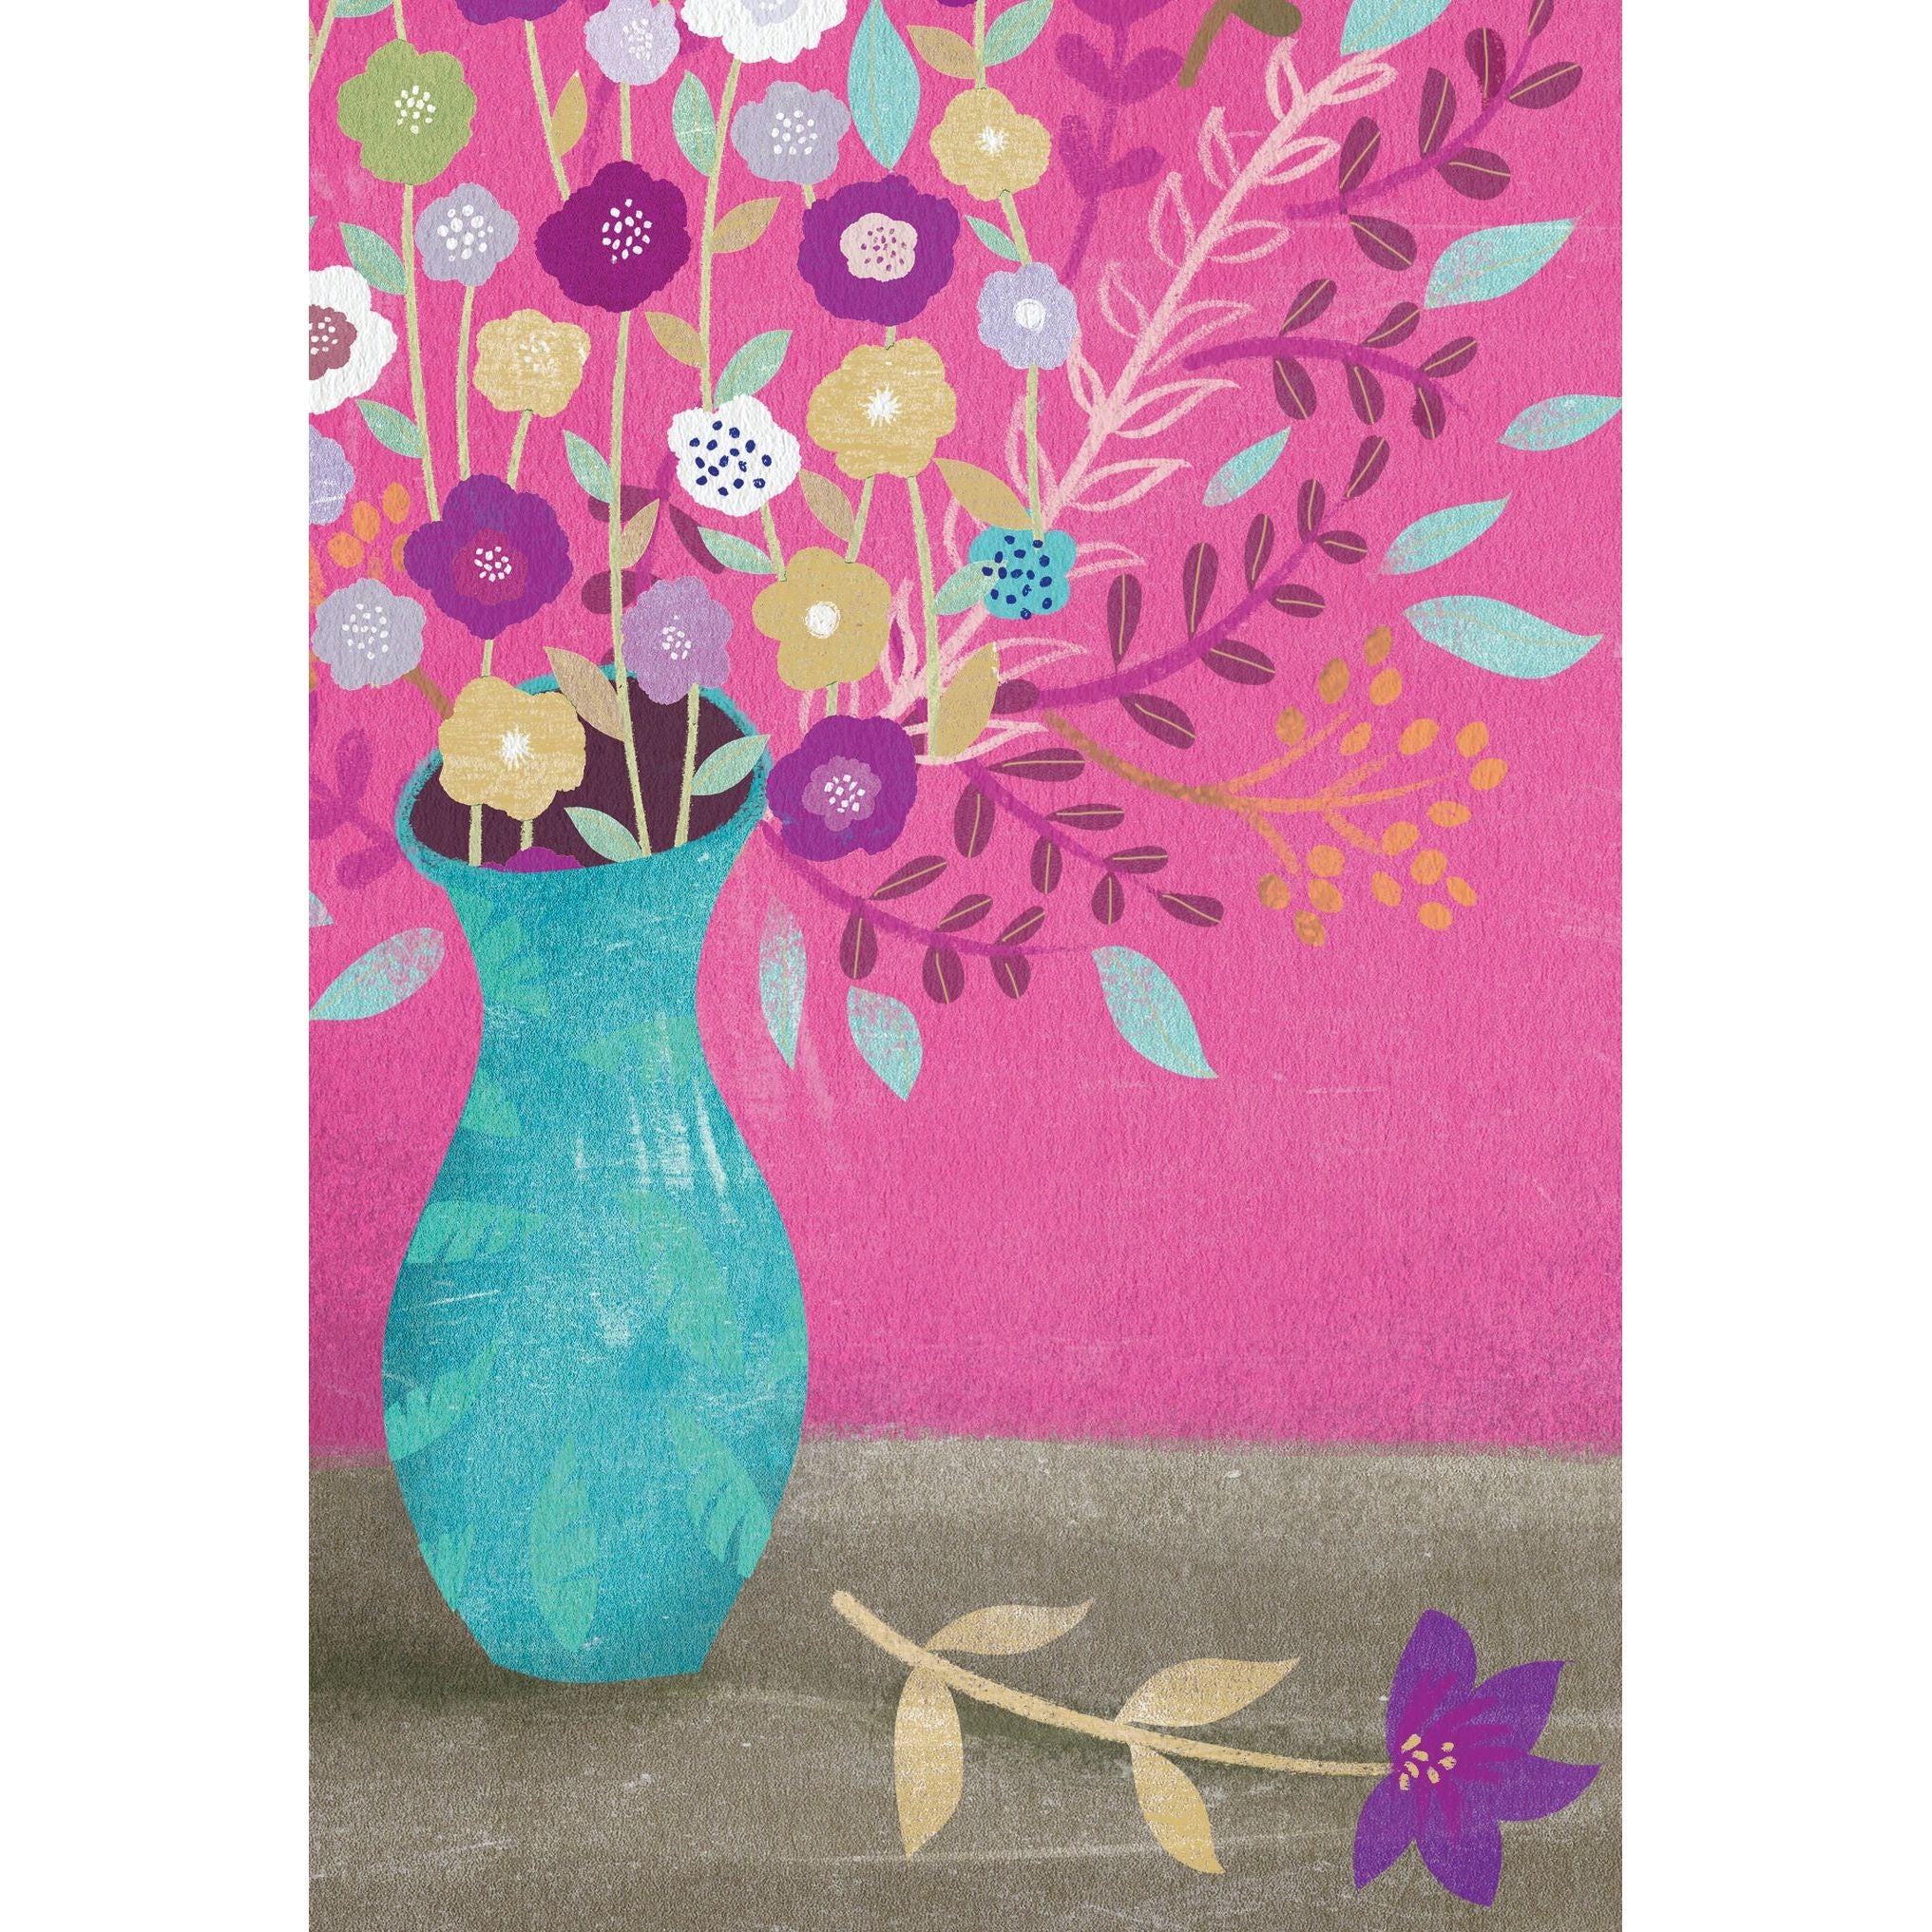 Blank Note Card Pink and Flowers - Cardmore